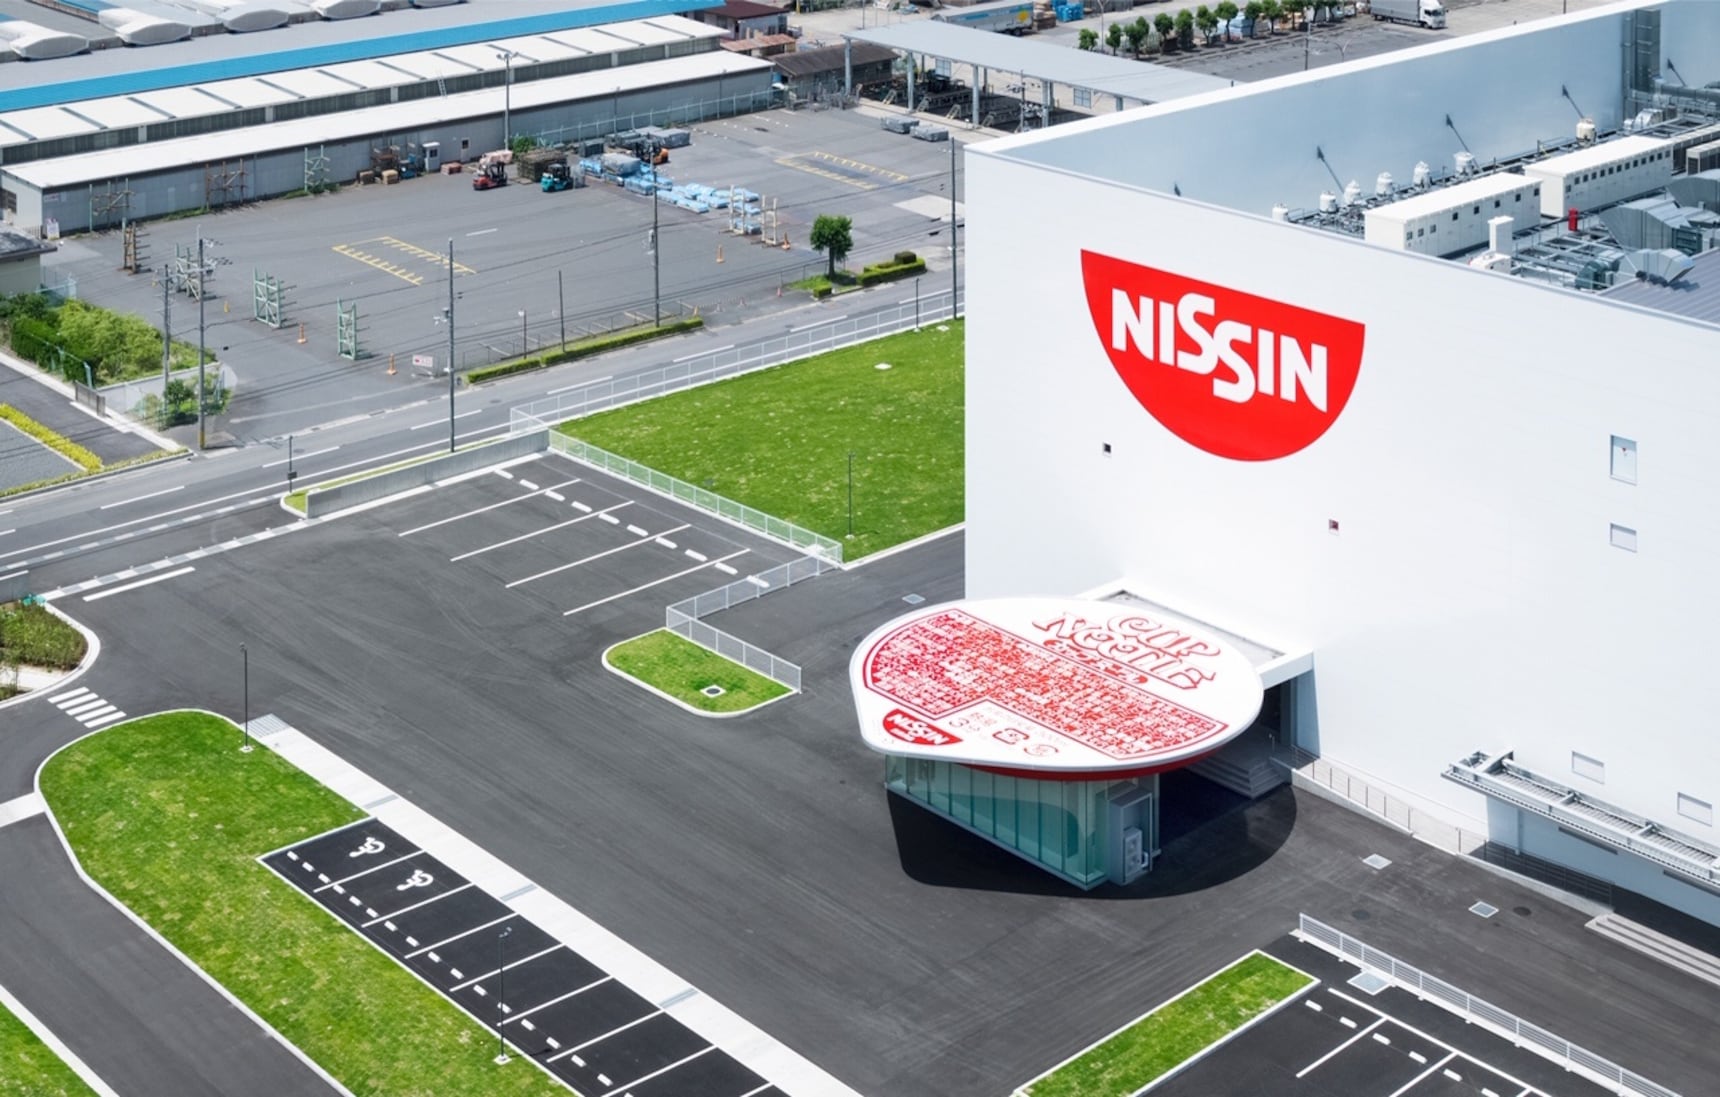 Say Hello to Kansai's New Cup Noodle Factory